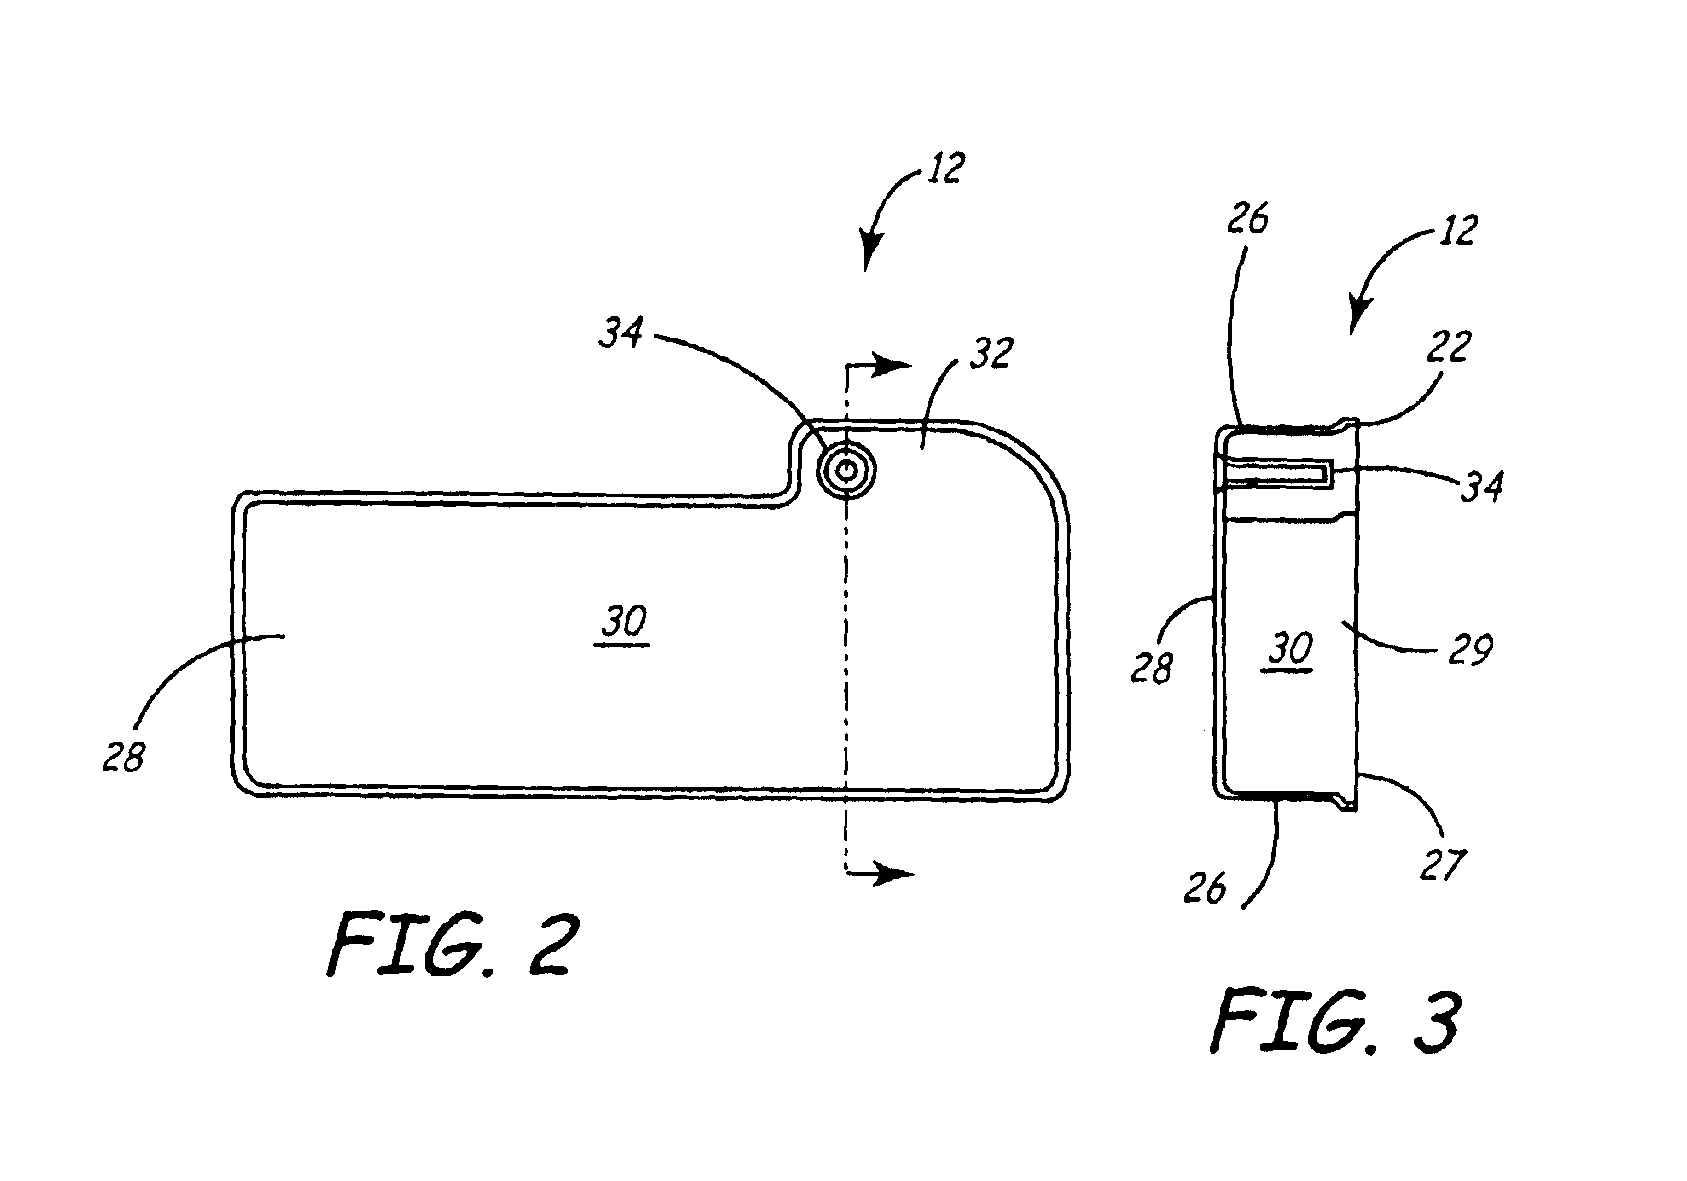 Contoured battery for implantable medical devices and method of manufacture